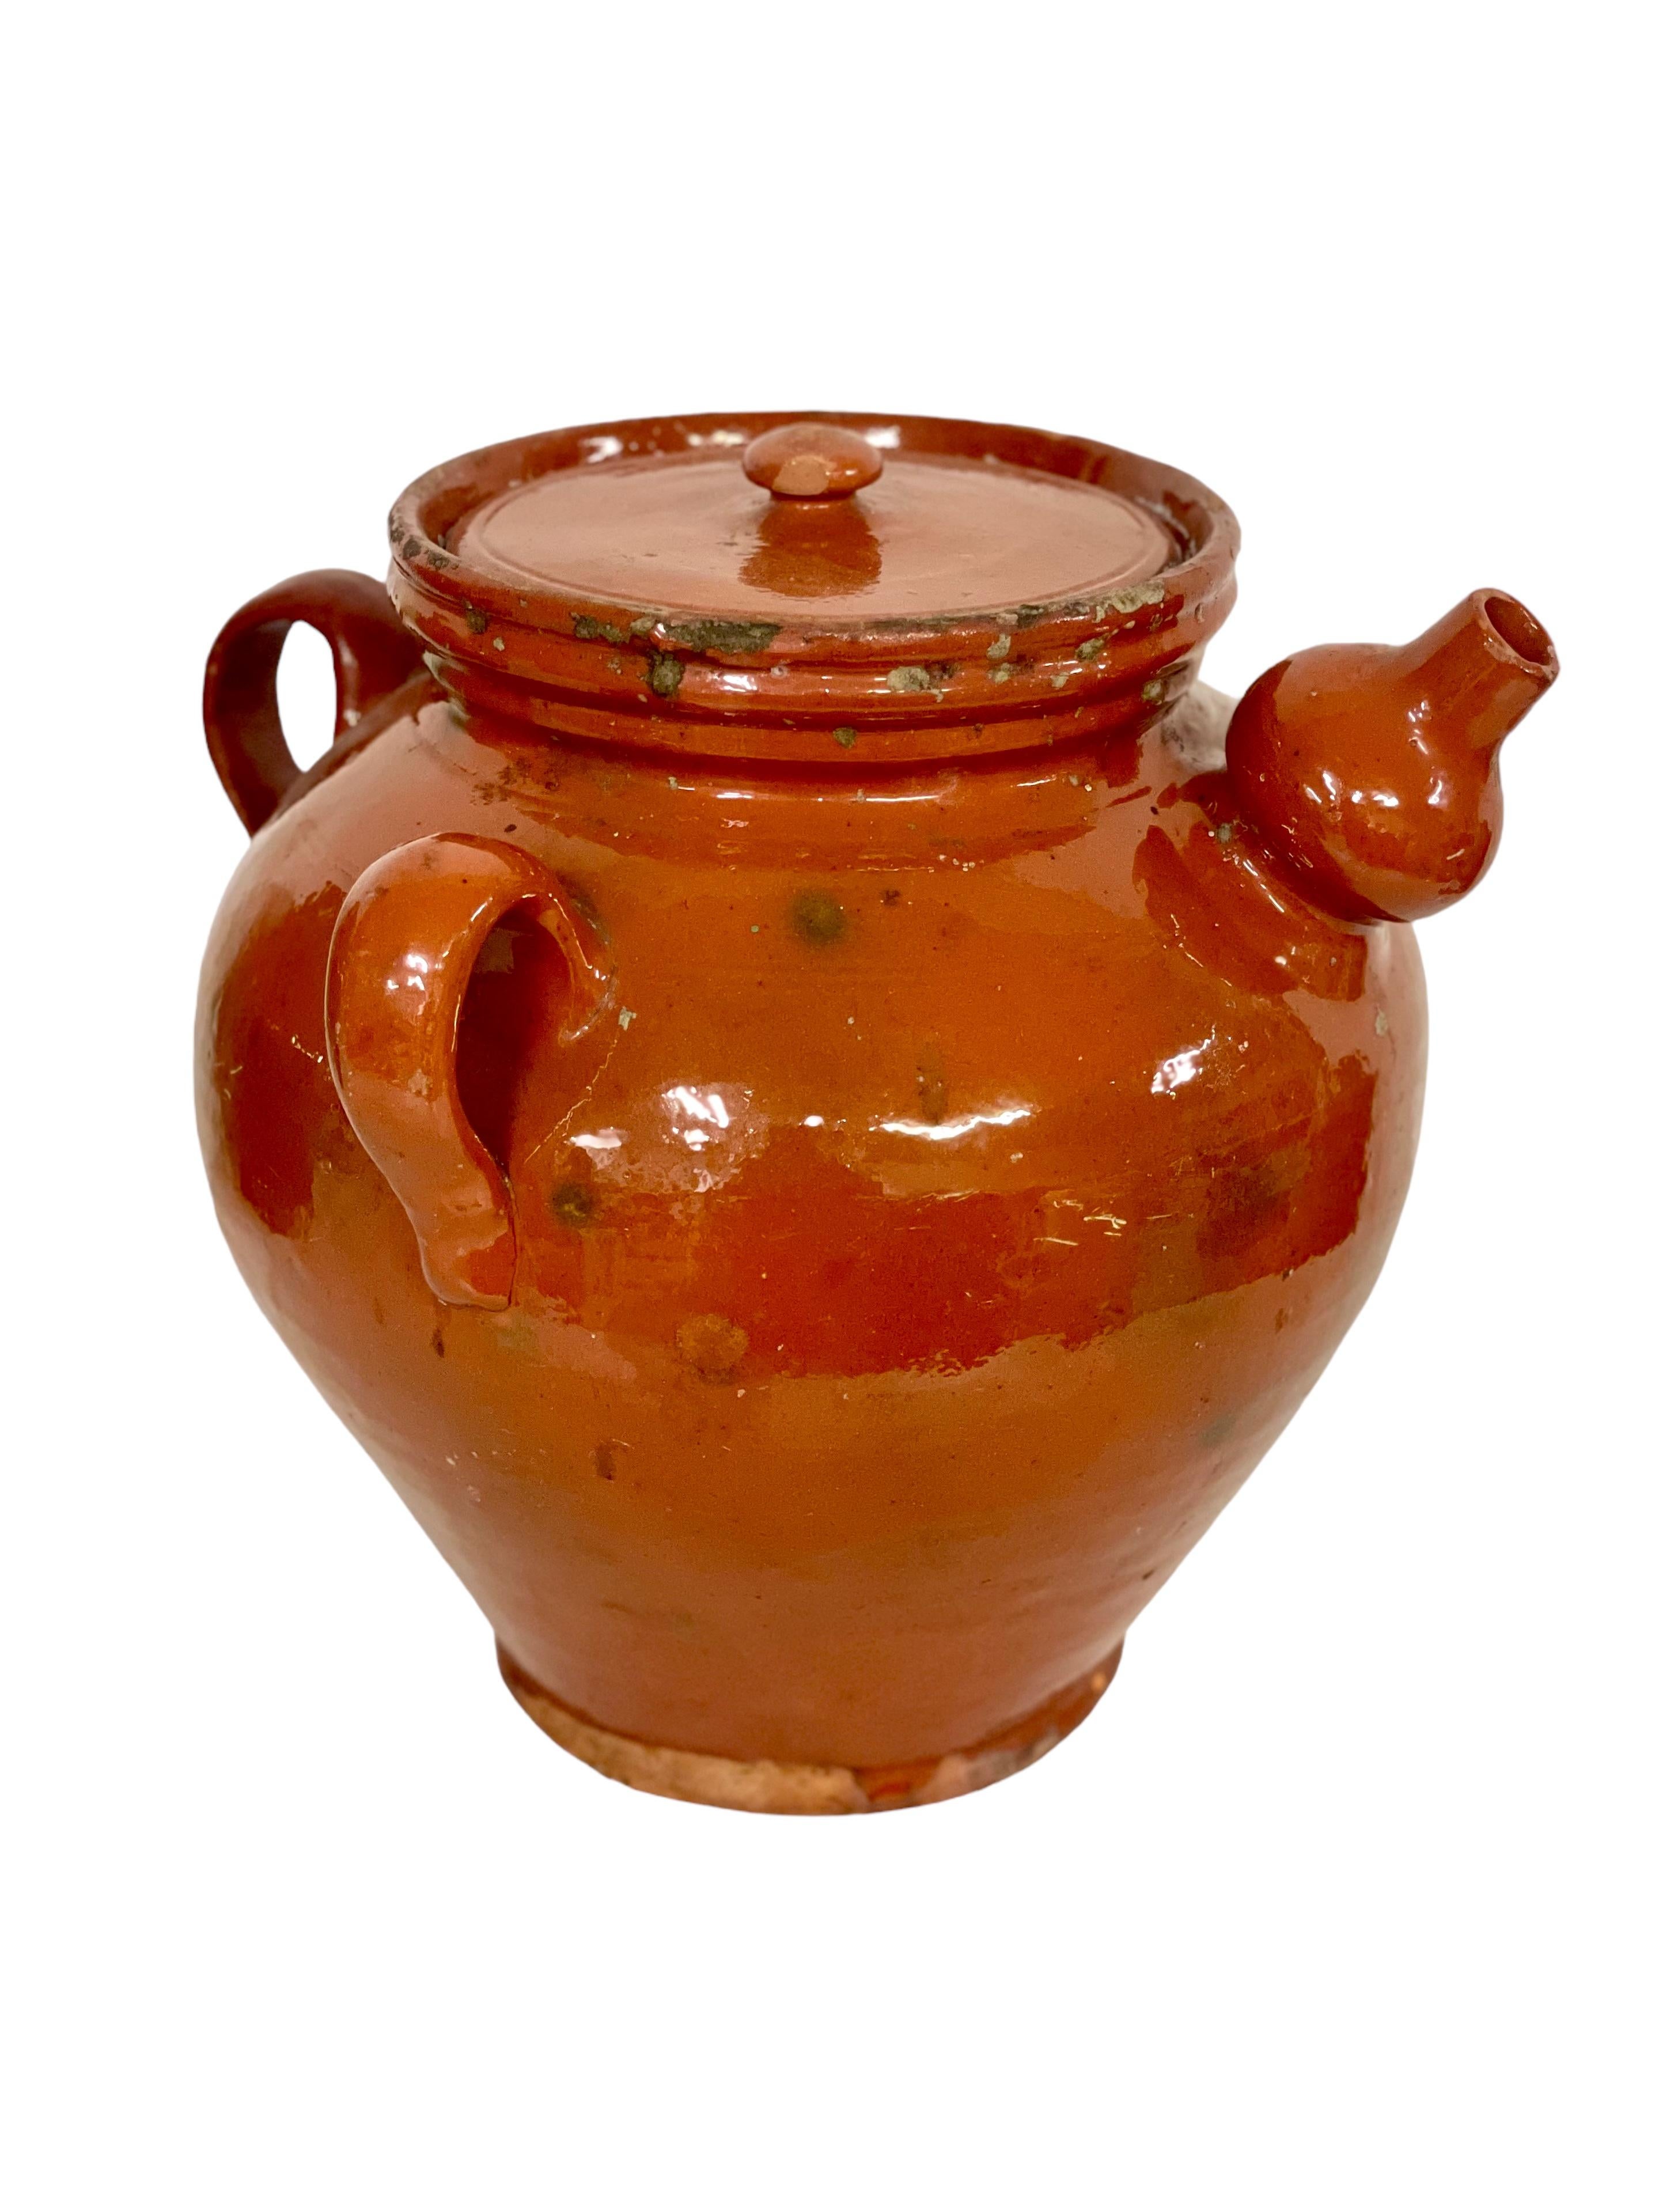 A fine French antique walnut oil jar, complete with original close-fitting lid, three side handles, and interestingly shaped spout. Originally designed for the storage and preservation of nut or olive oils, this wonderful terracotta pot with its